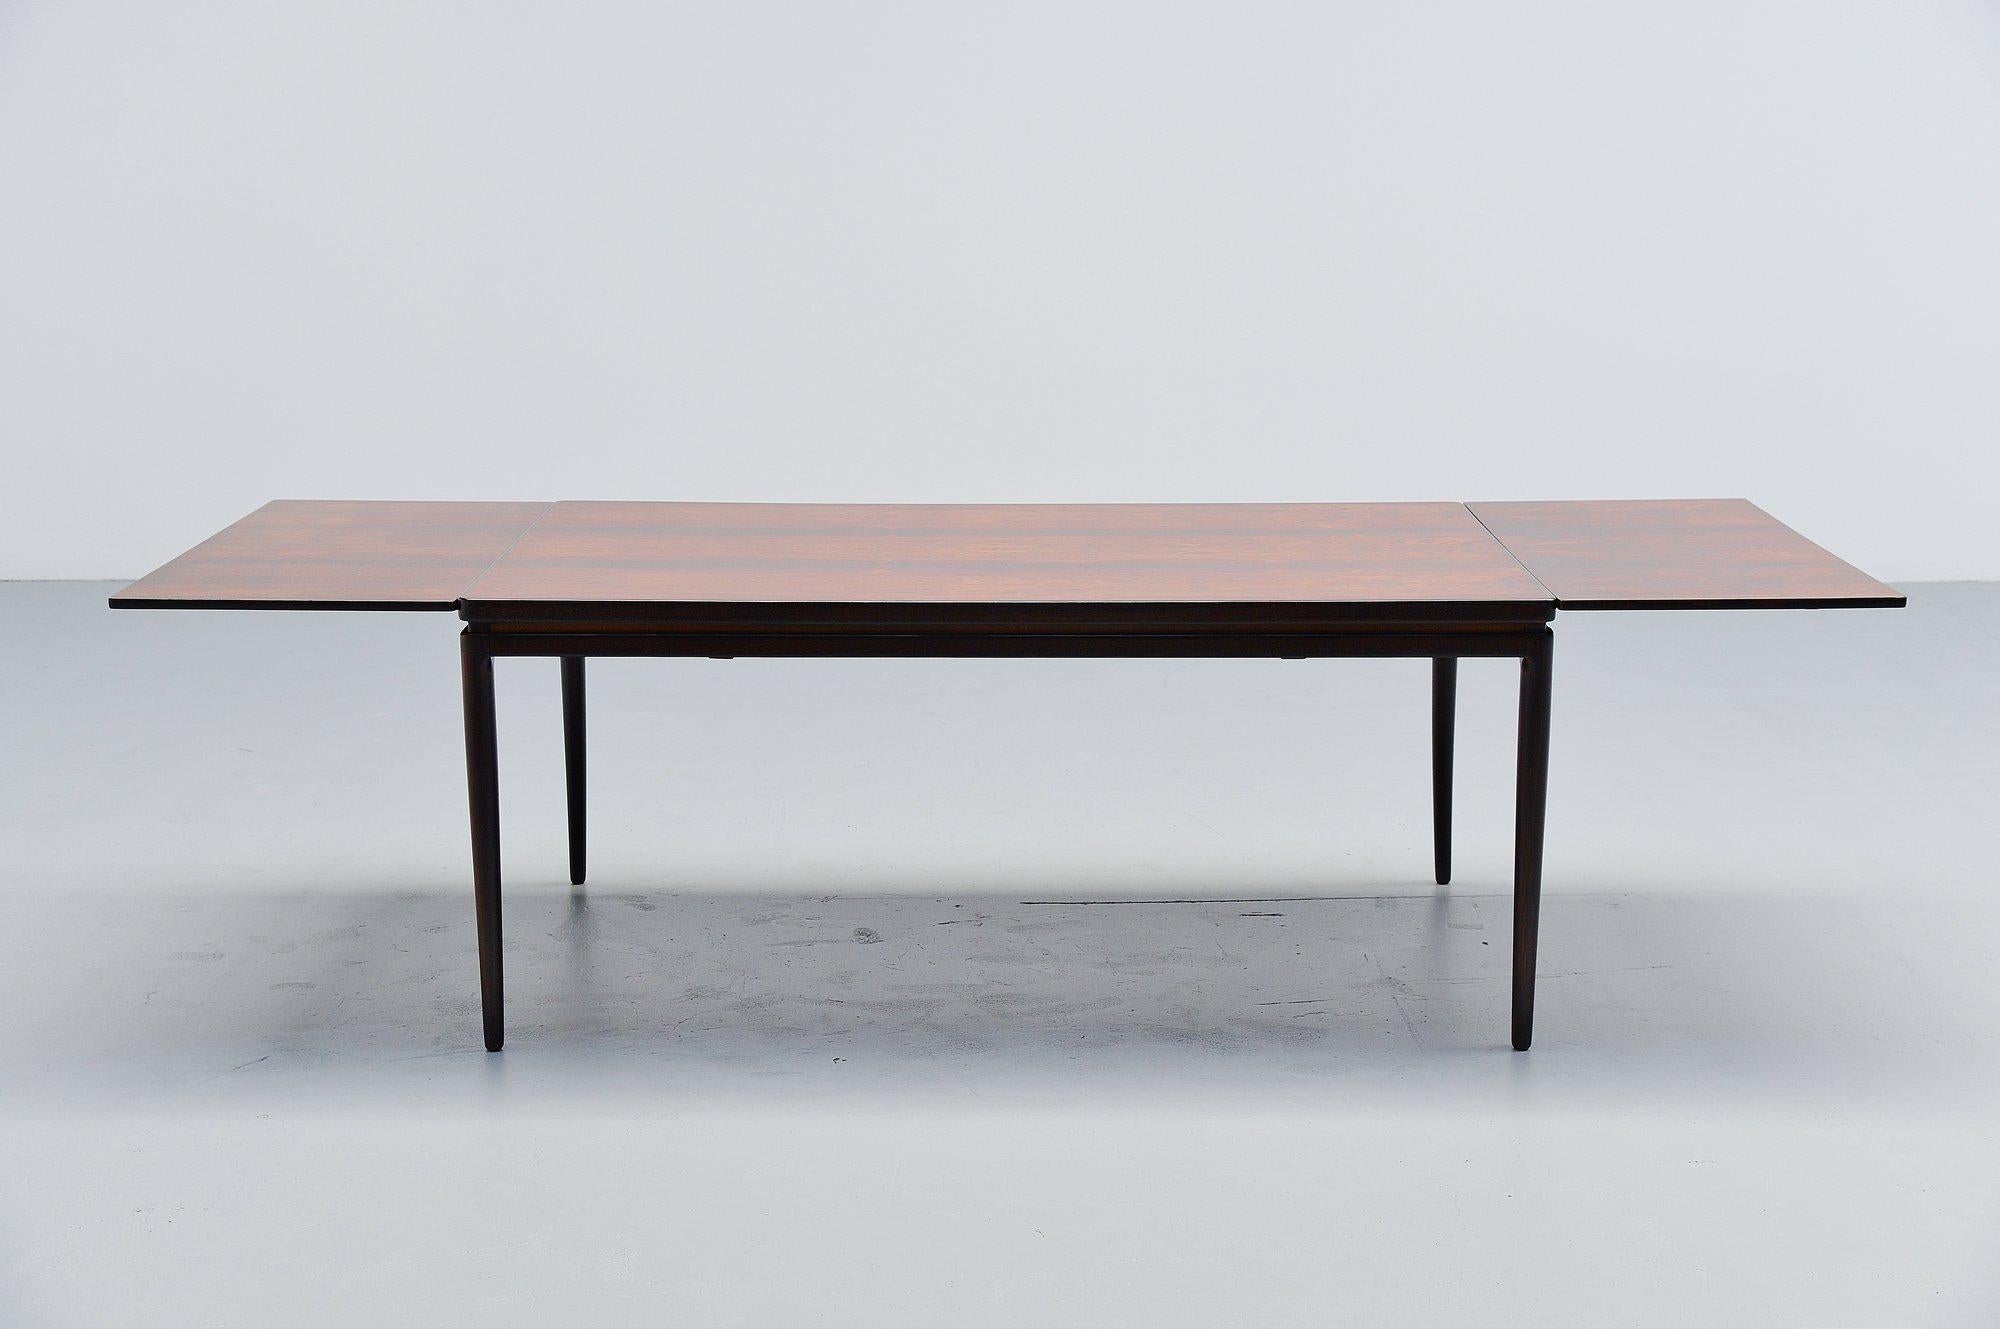 Nice Danish modern rosewood extendable dining table designed by Johannes Andersen for Christian Linneberg, Denmark 1964. This table has an amazing grain to the warm rosewood veneer. In normal position this table is 165 cm long, when you extract the